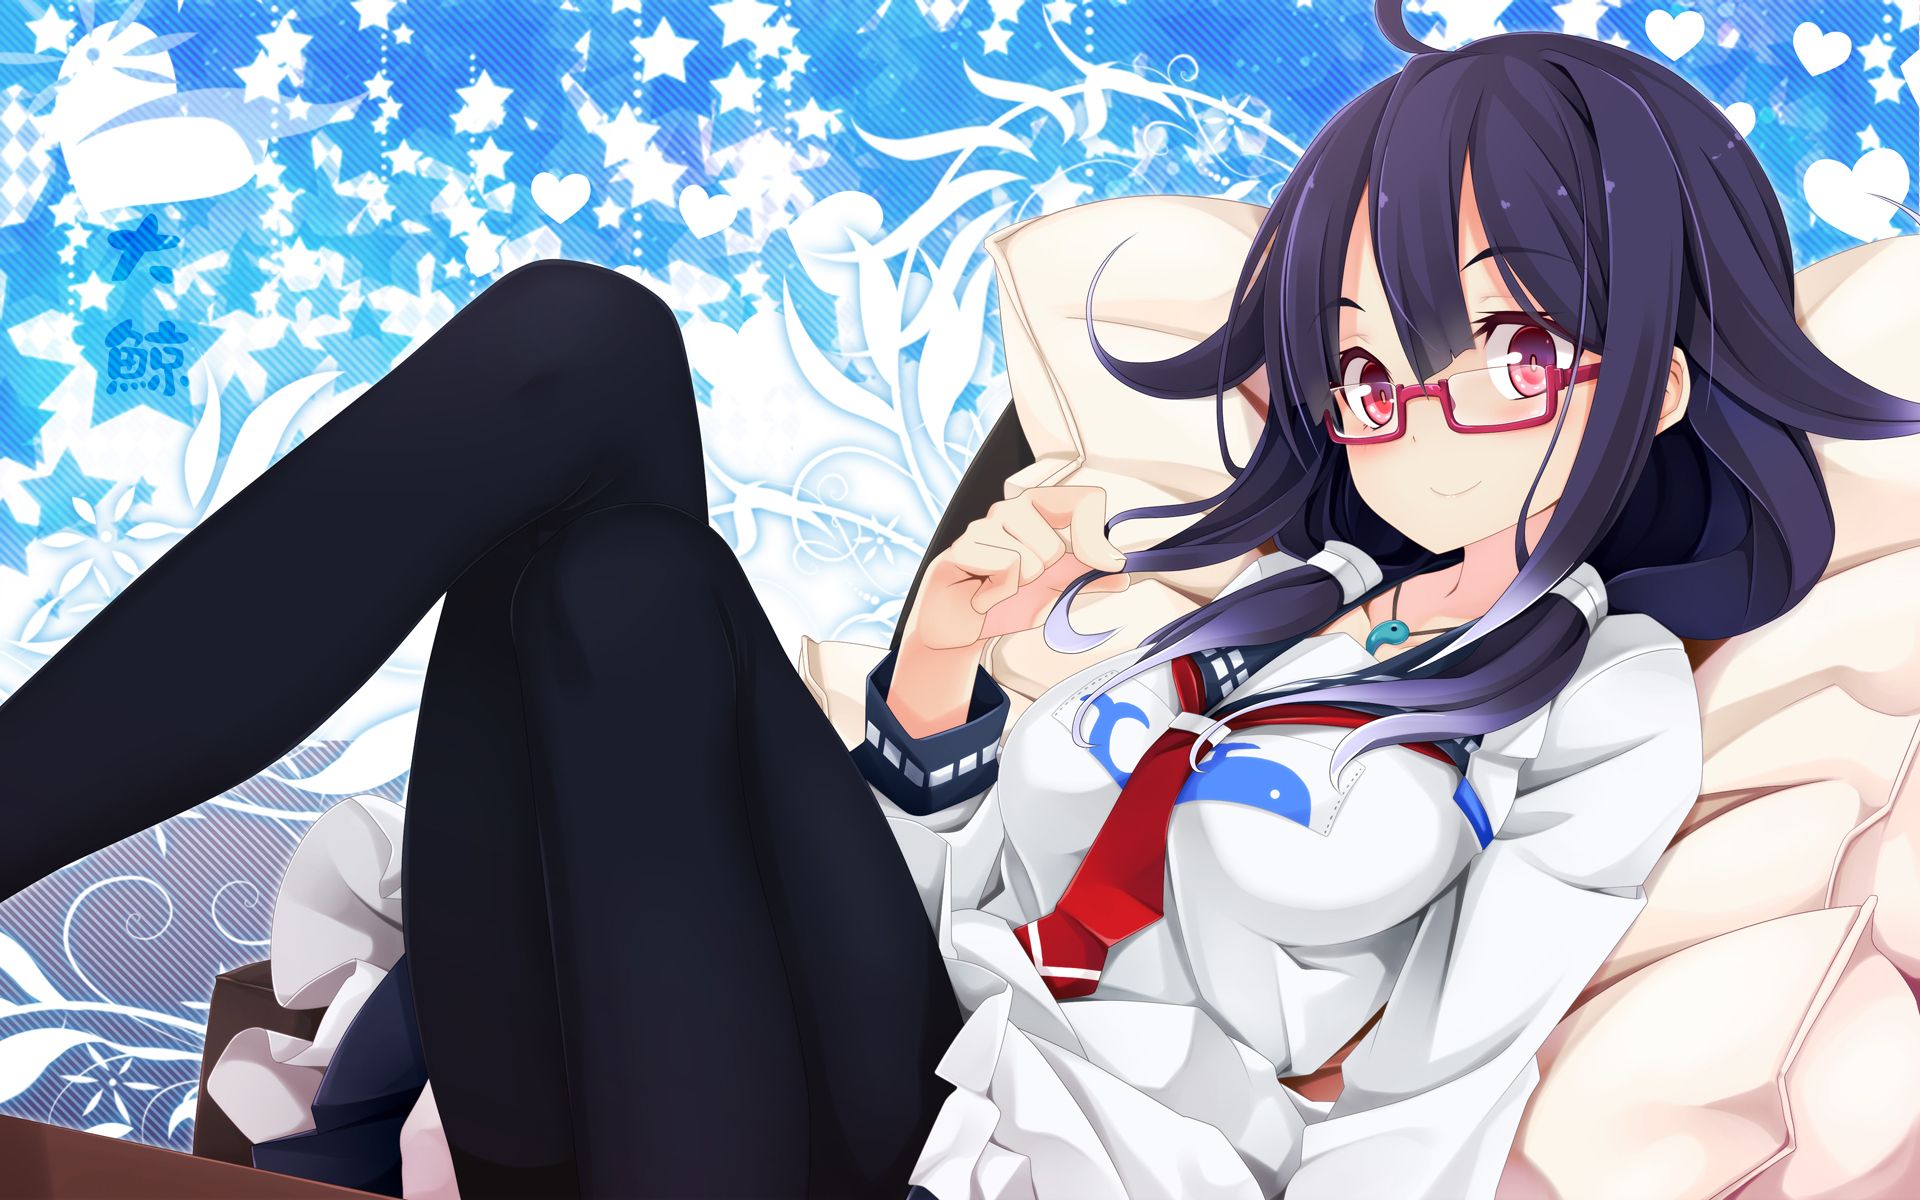 Hot Anime Student Girl Wallpaper and Image